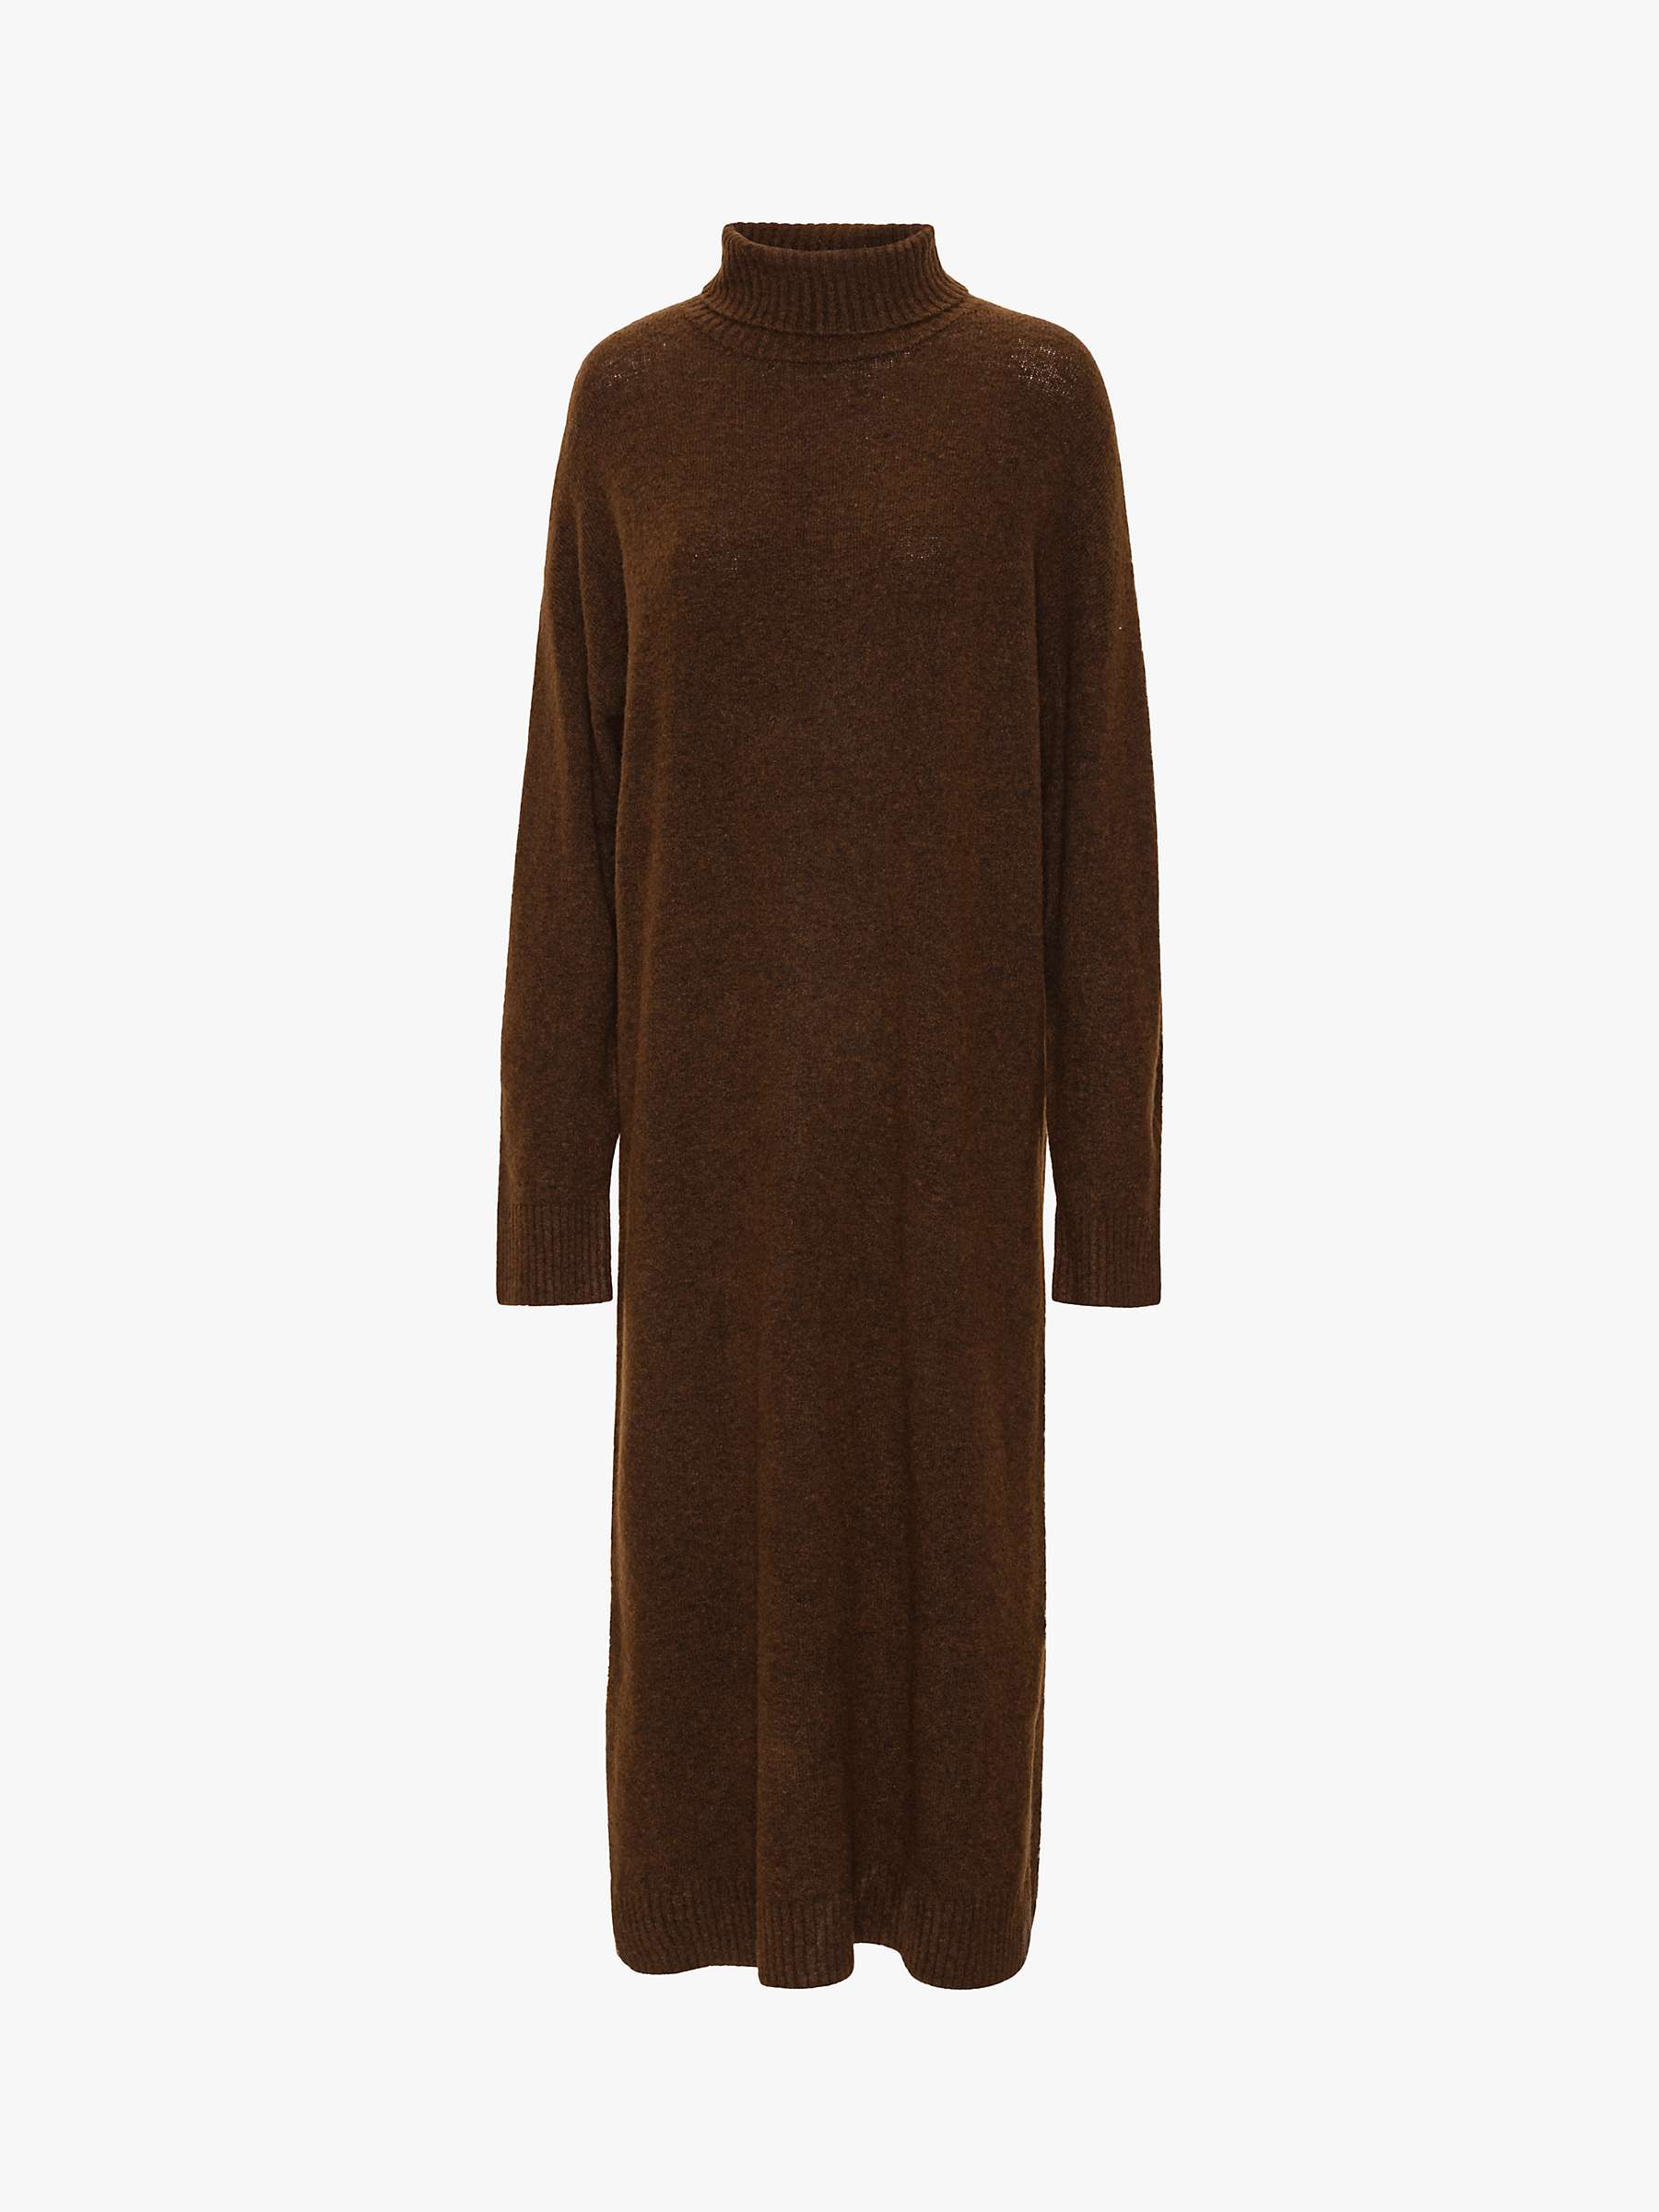 A-VIEW Penny Knit Wool Blend Jumper Dress, Brown at John Lewis & Partners